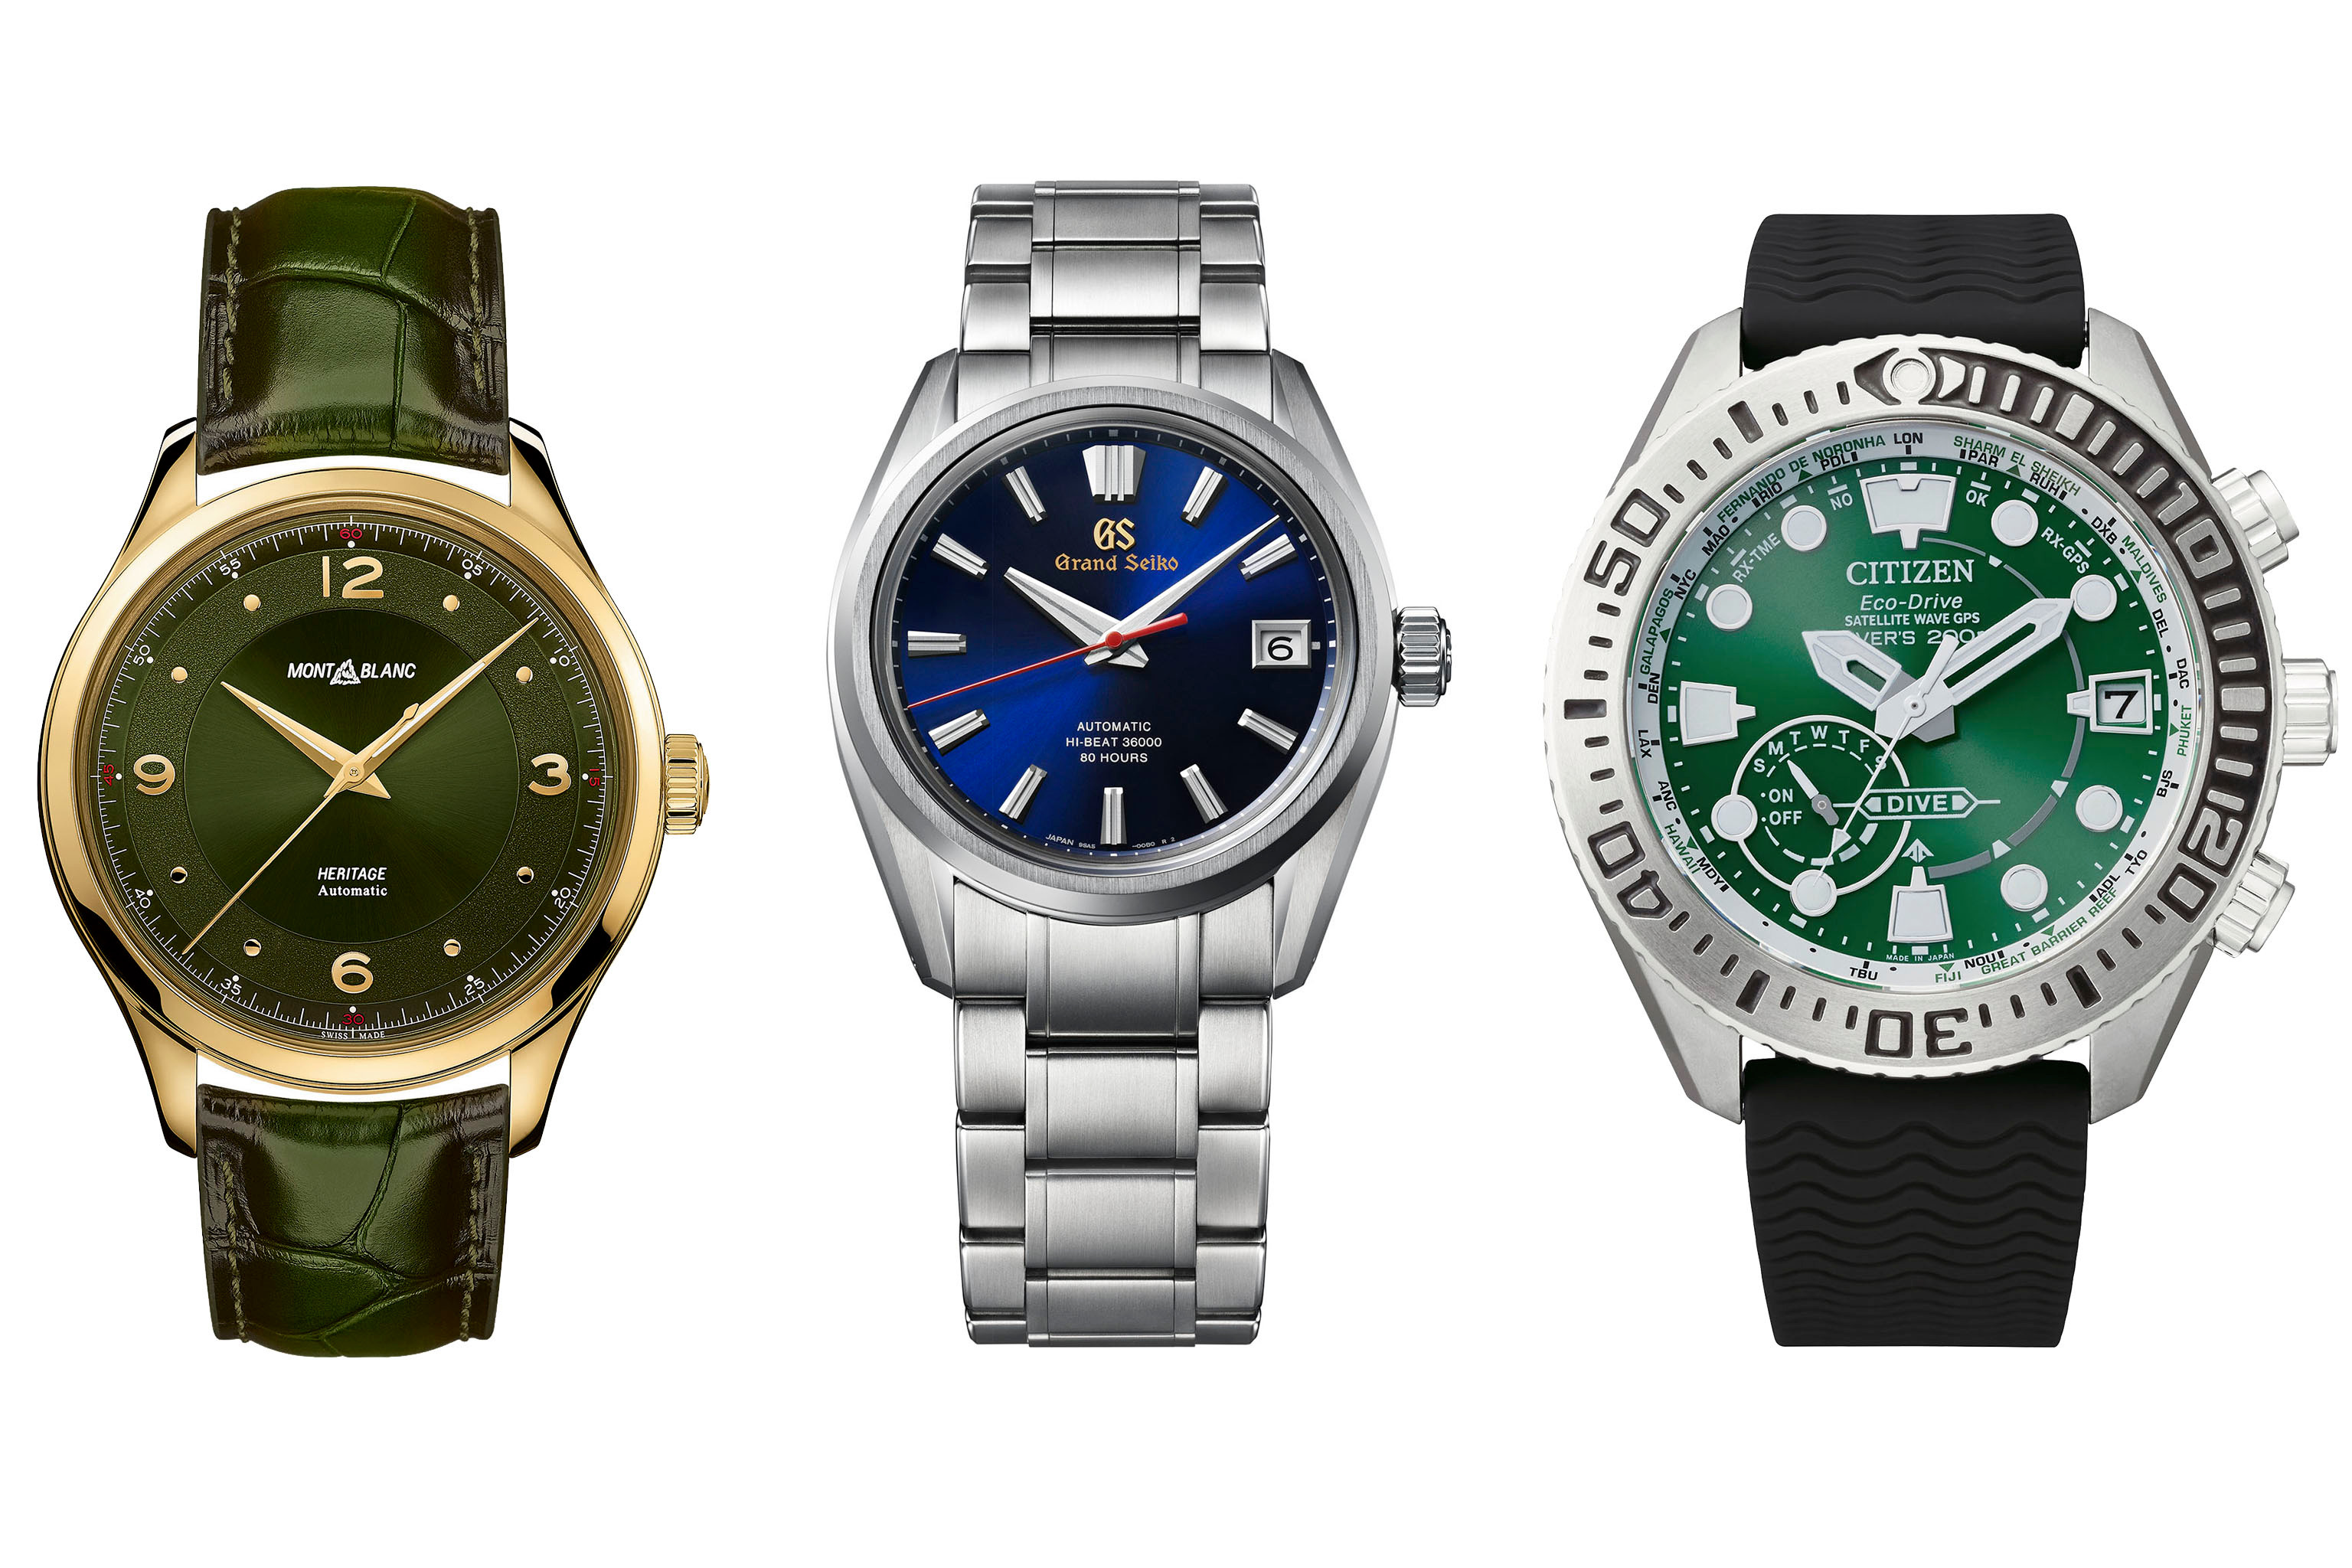 From Left: Montblanc, Grand Seiko, and Citizen